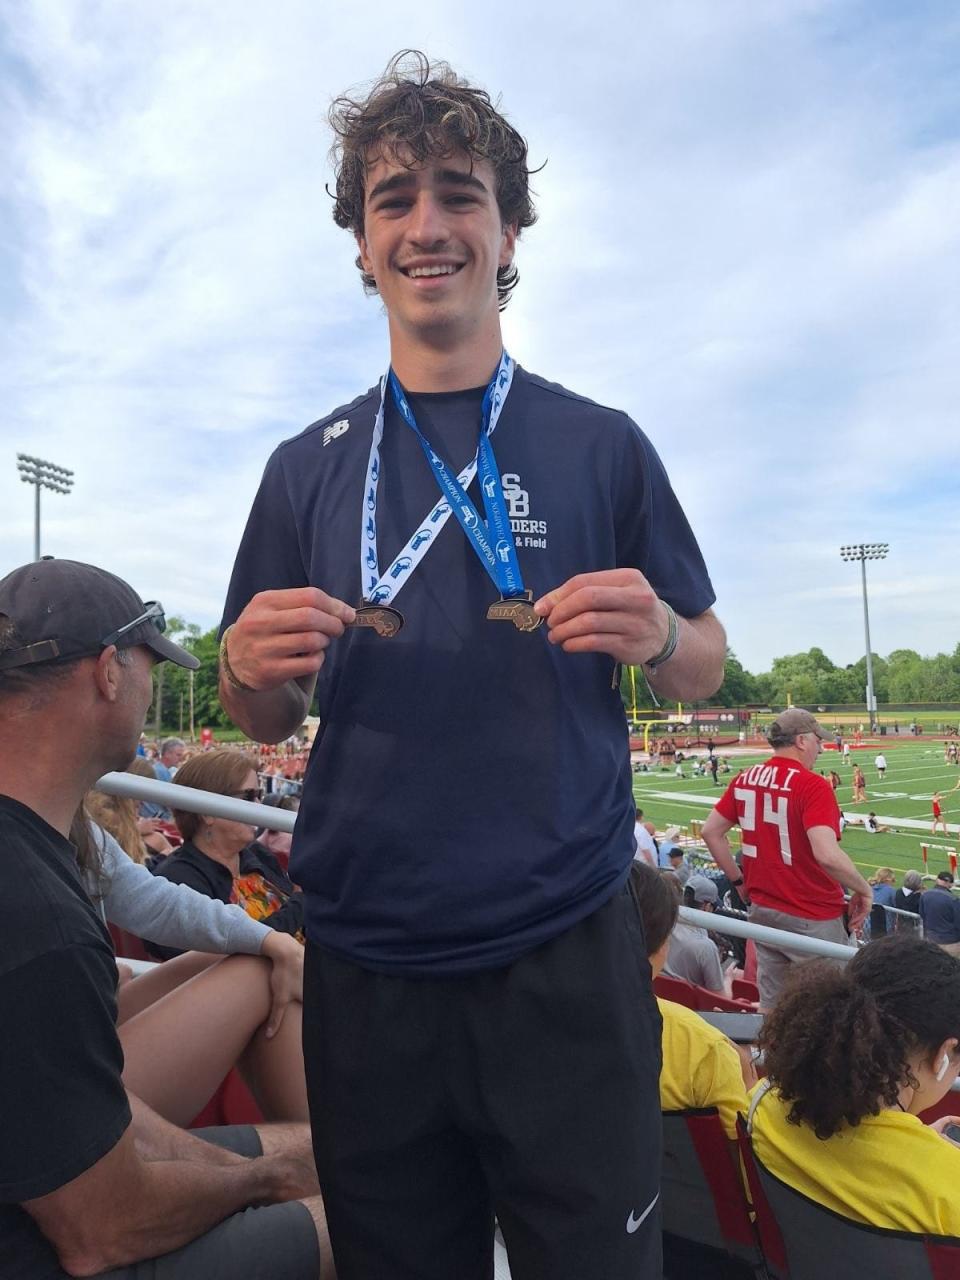 Somerset Berkley track and field star Camden Rose shows off his medals during the Division 3 state meet at Merrimack College.